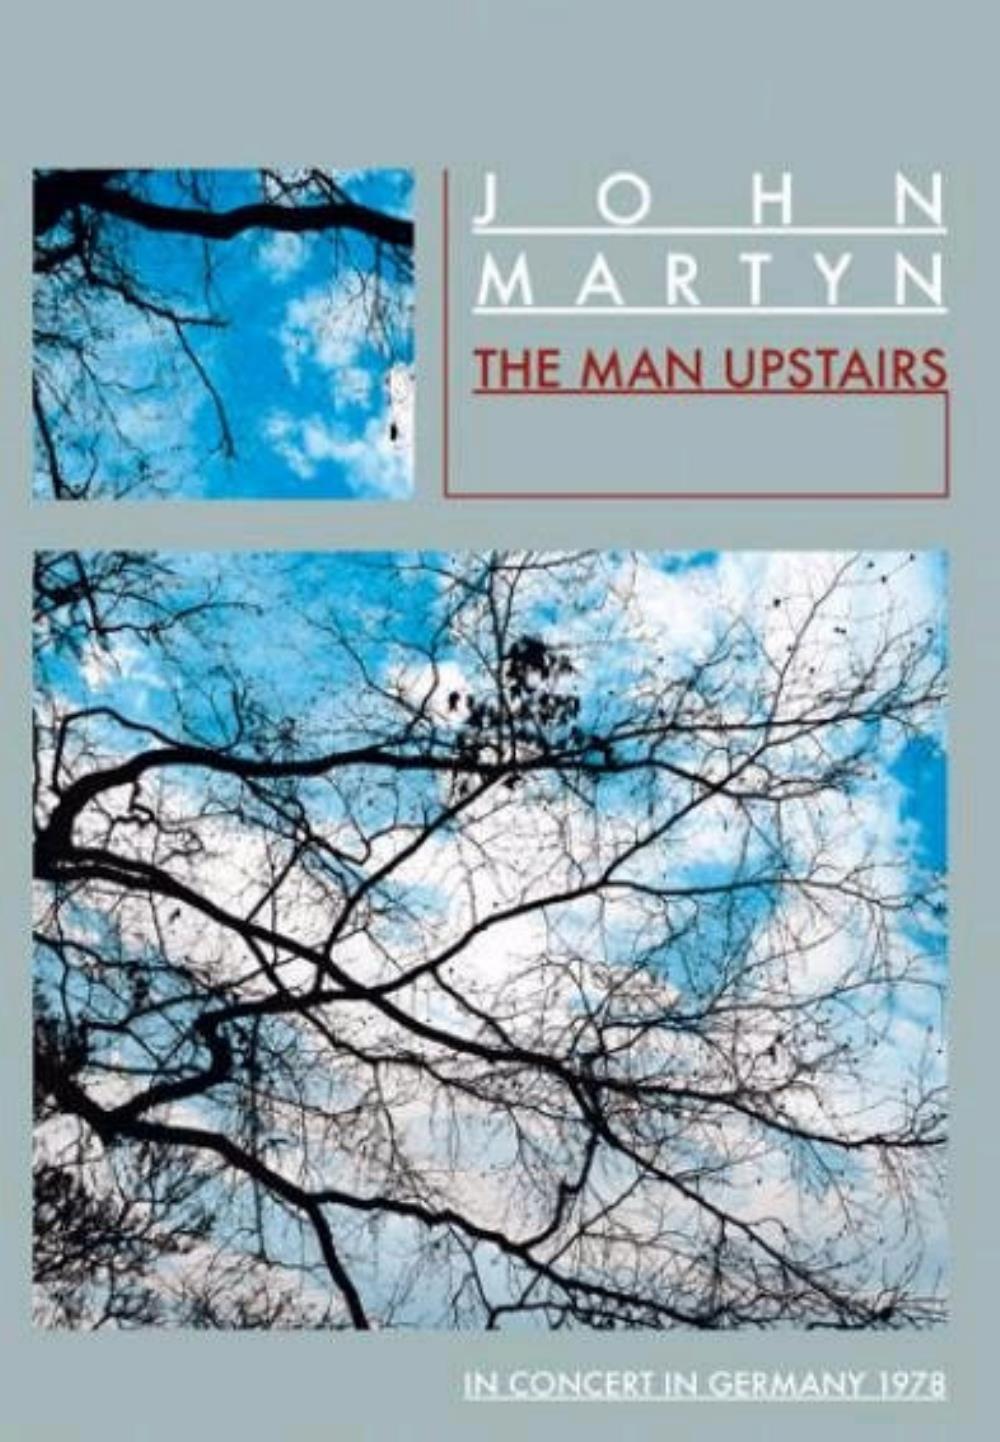 John Martyn - The Man Upstairs - In Concert in Germany 1978 CD (album) cover